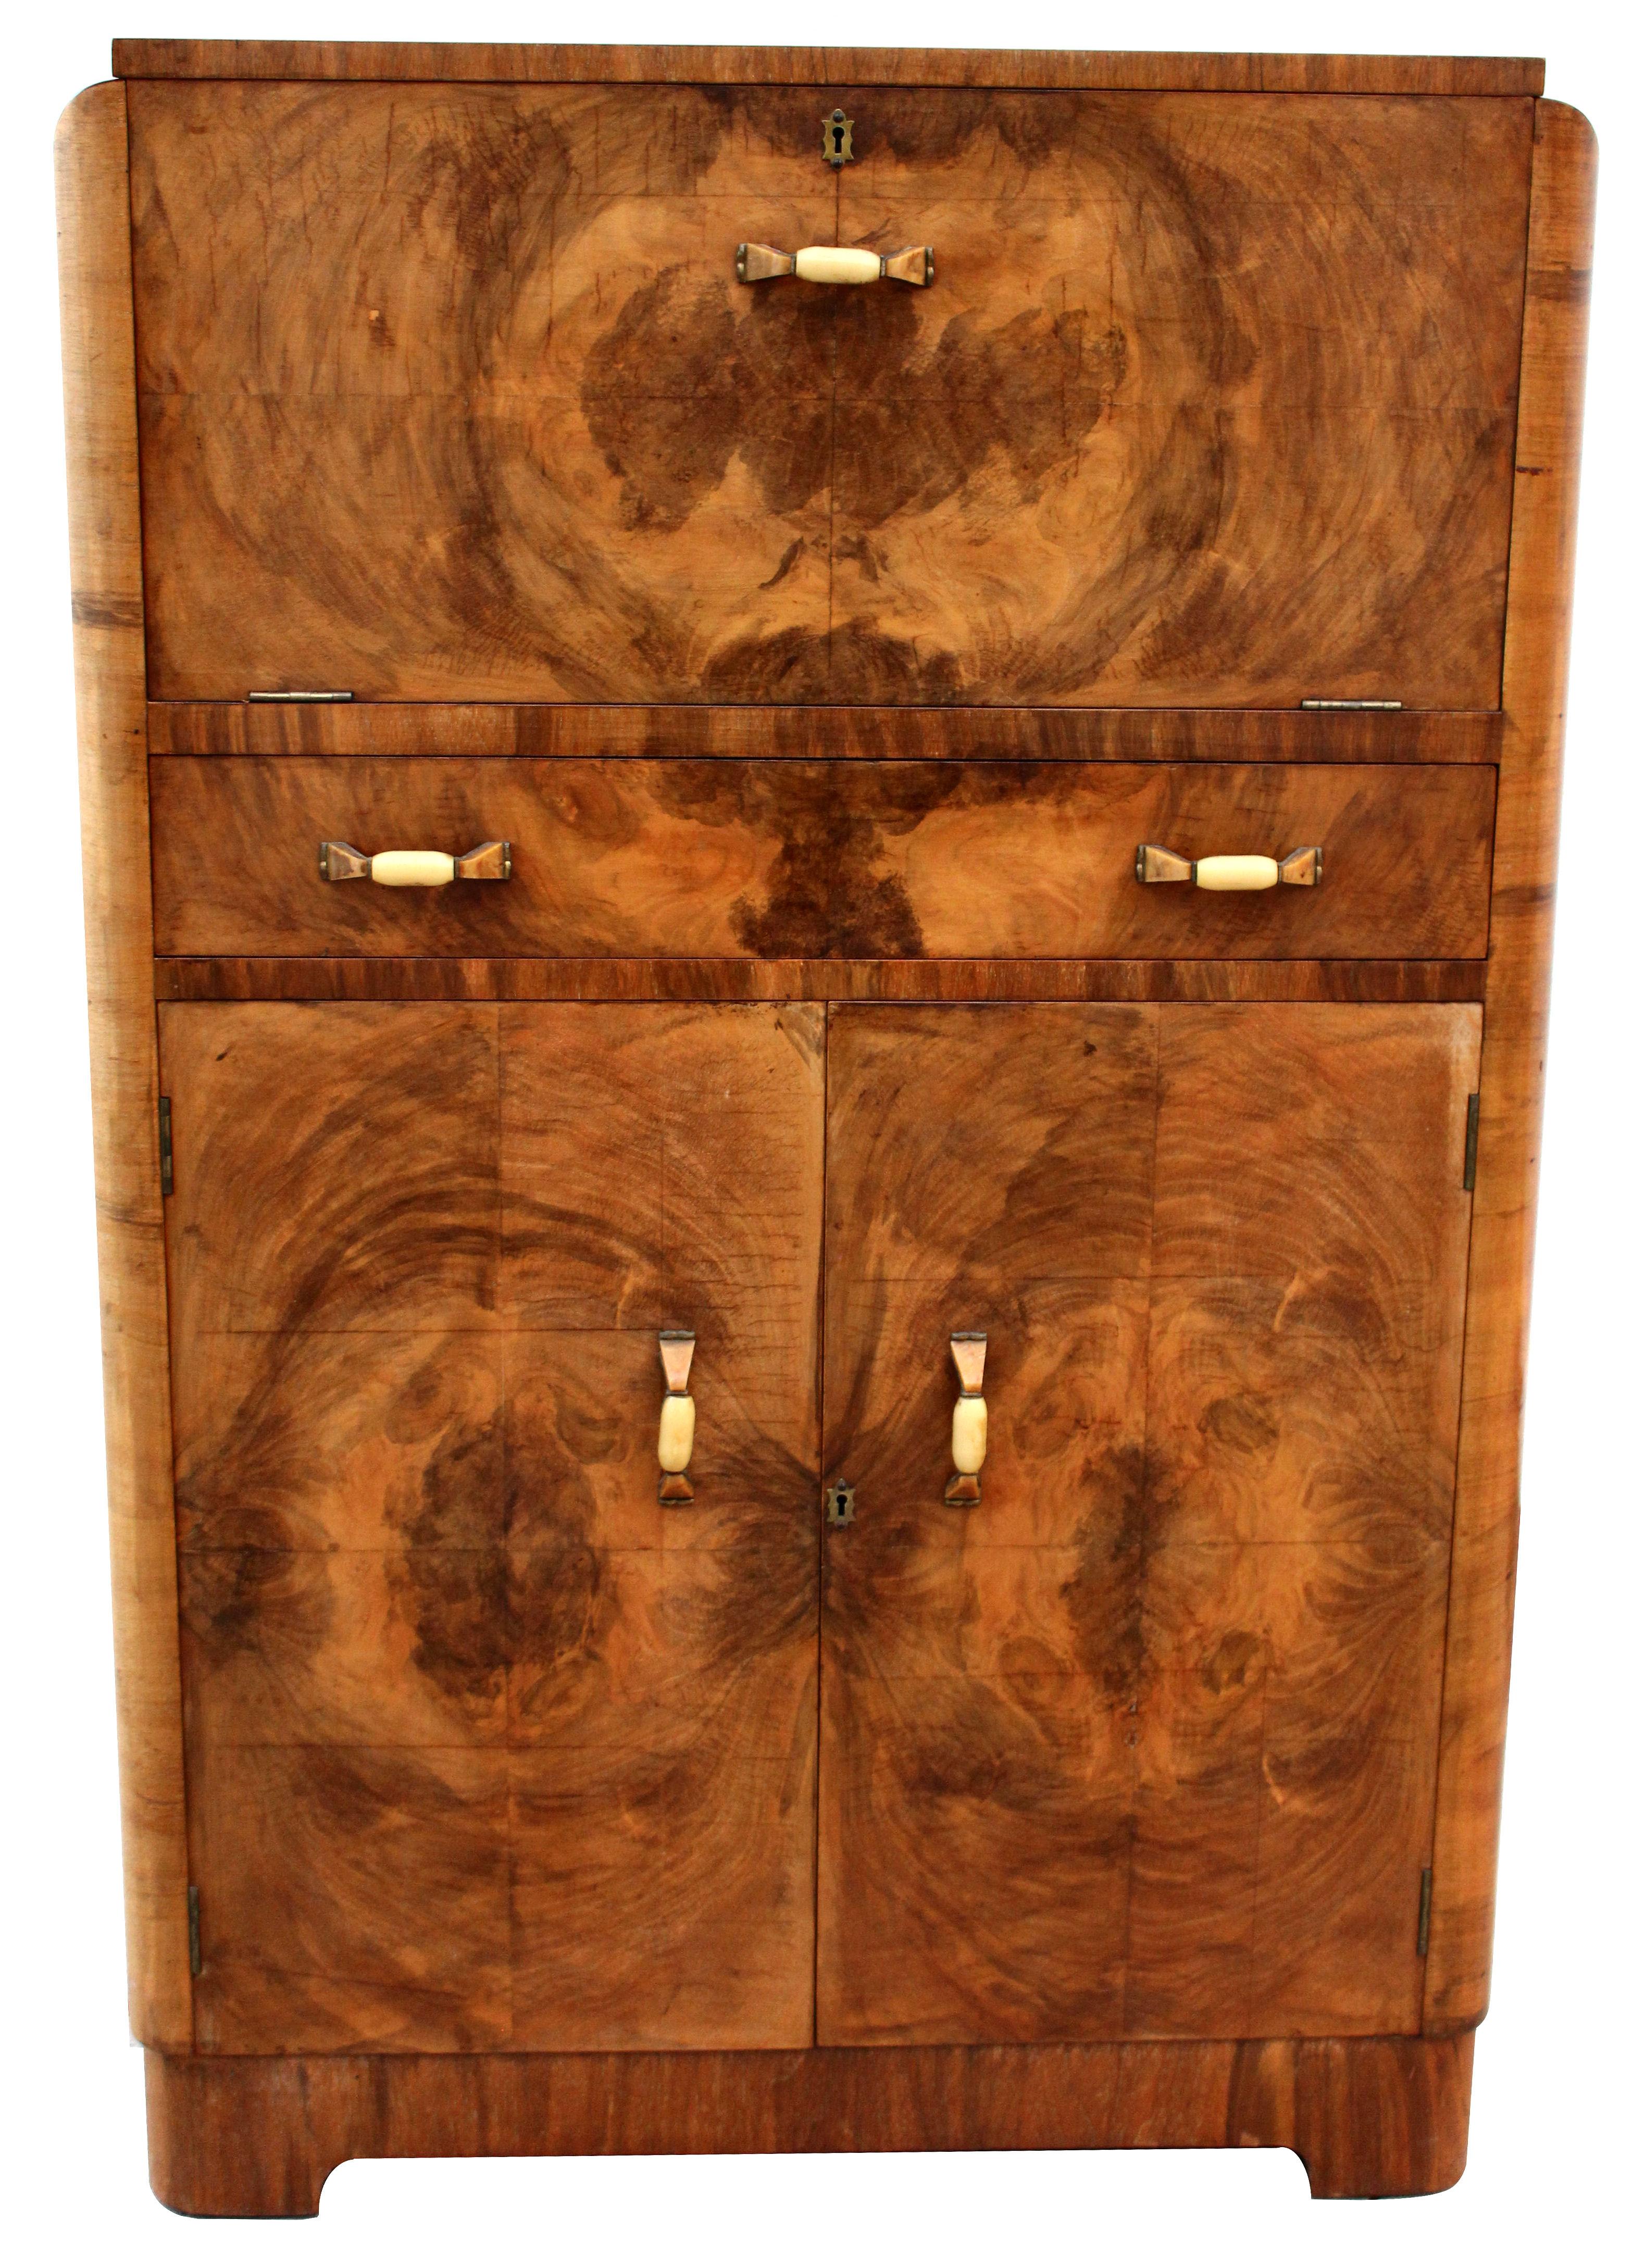 For your consideration is this superbly stylish and totally authentic 1930s Art Deco walnut upright cocktail cabinet, every Deco interior should have one of these. Originating from England and dating to the mid-1930s this cabinet offers lots of